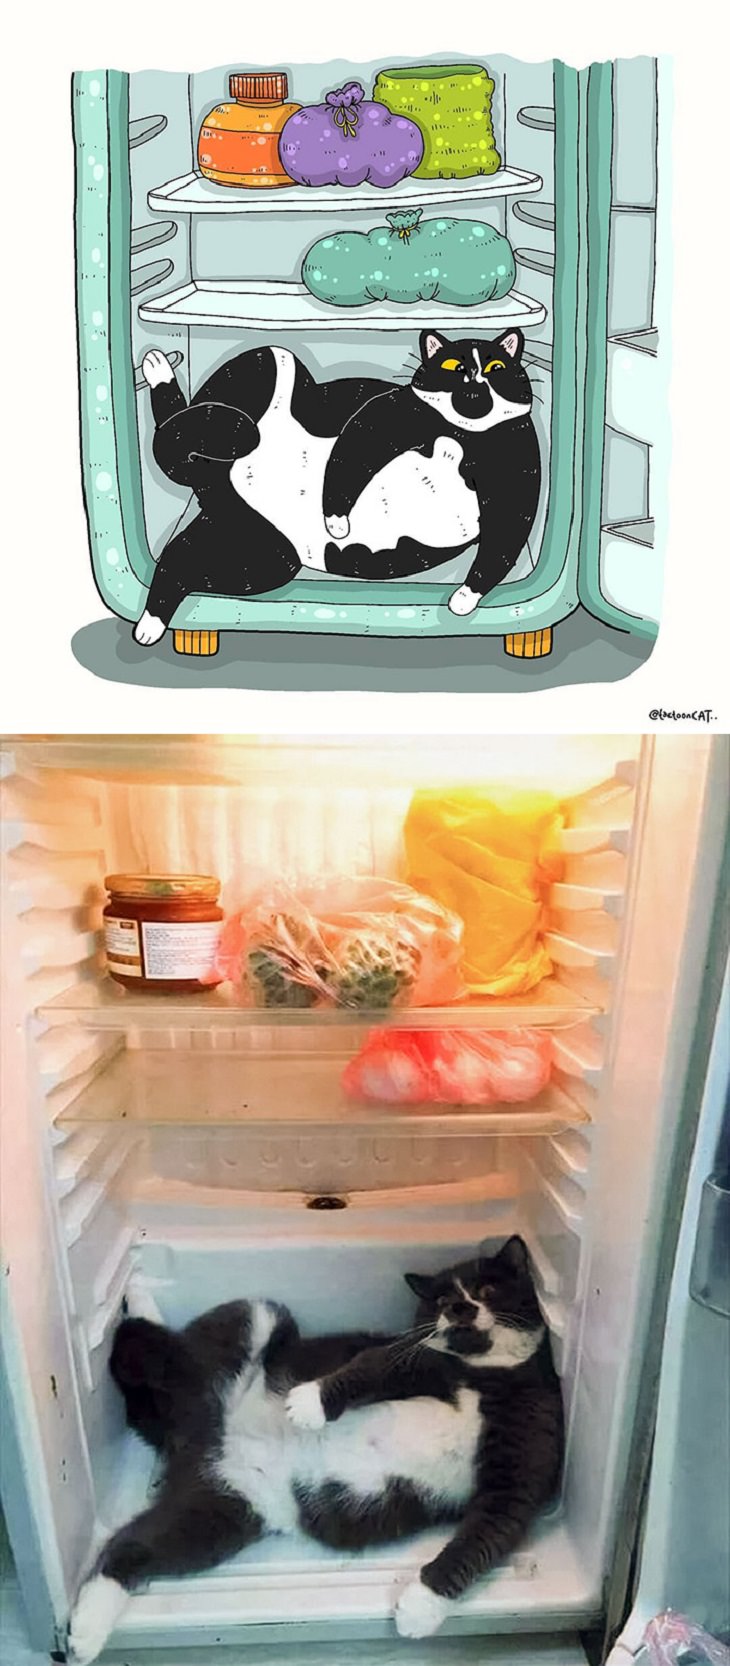 Cartoons of famous funny internet cats by Indonesian artist Tactooncat, Illustration and picture of a black and white cat in the bottom shelf of fridge